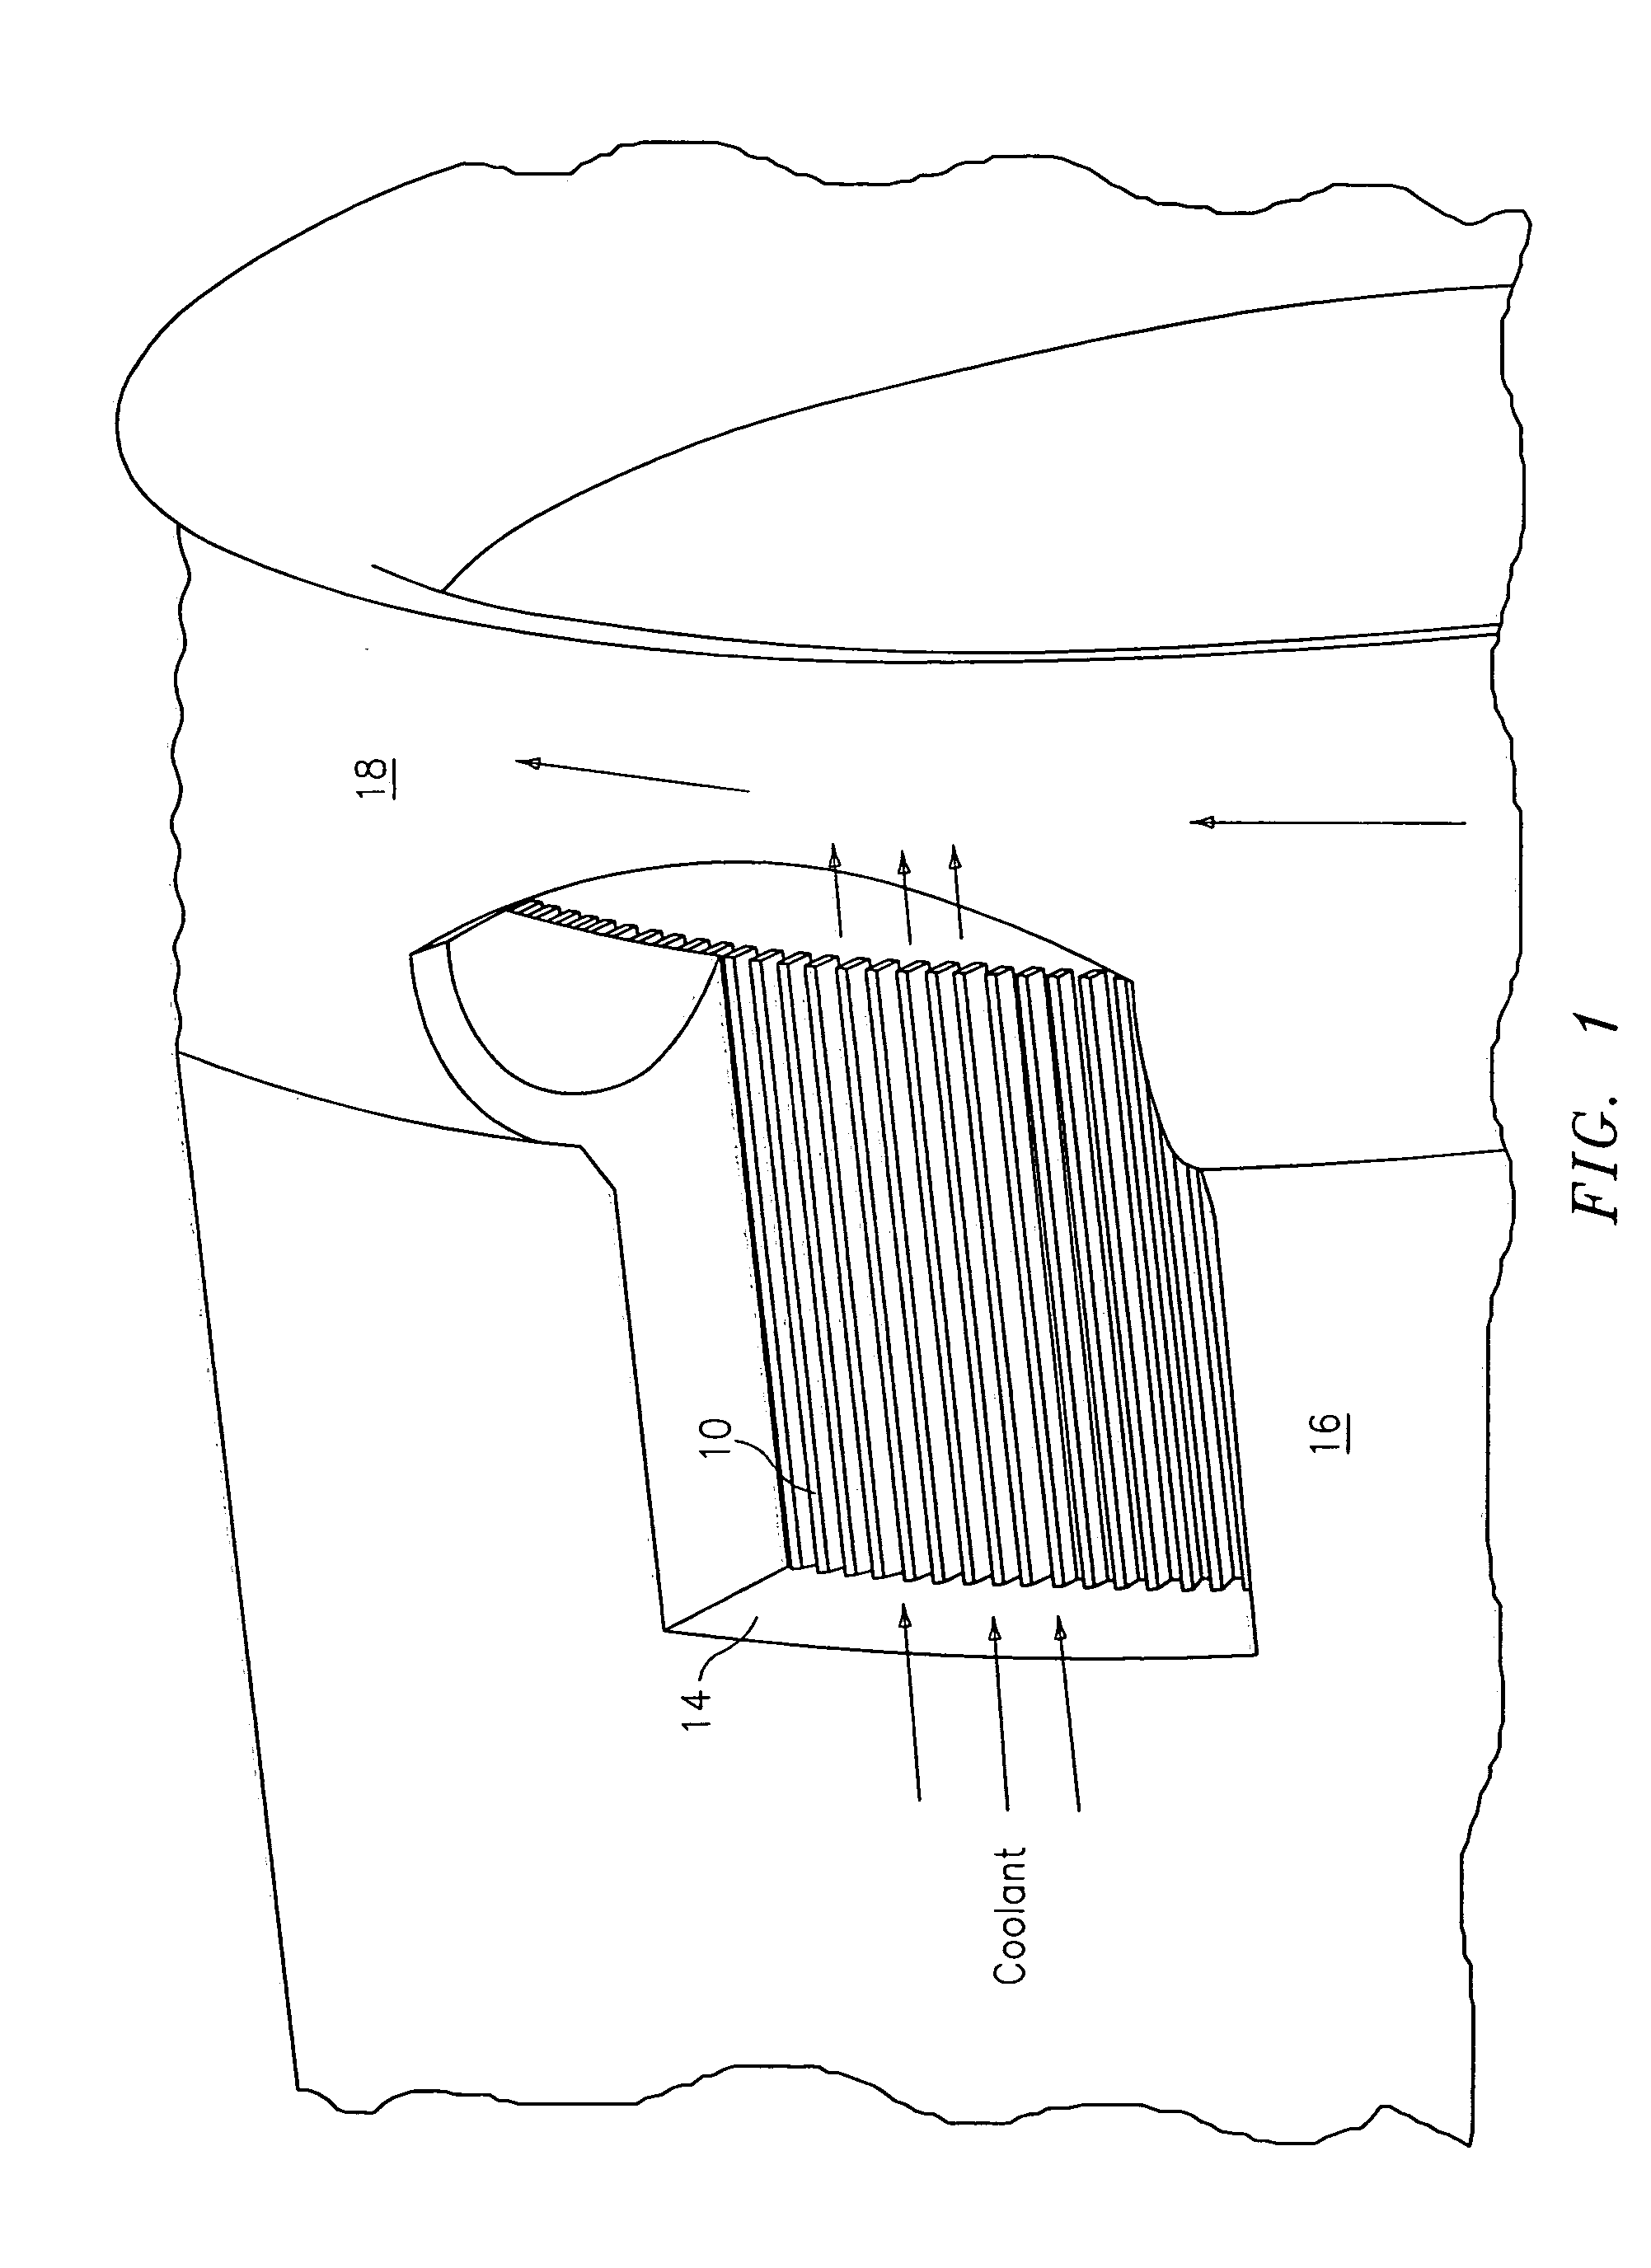 Enhanced performance torroidal coolant-collection manifold